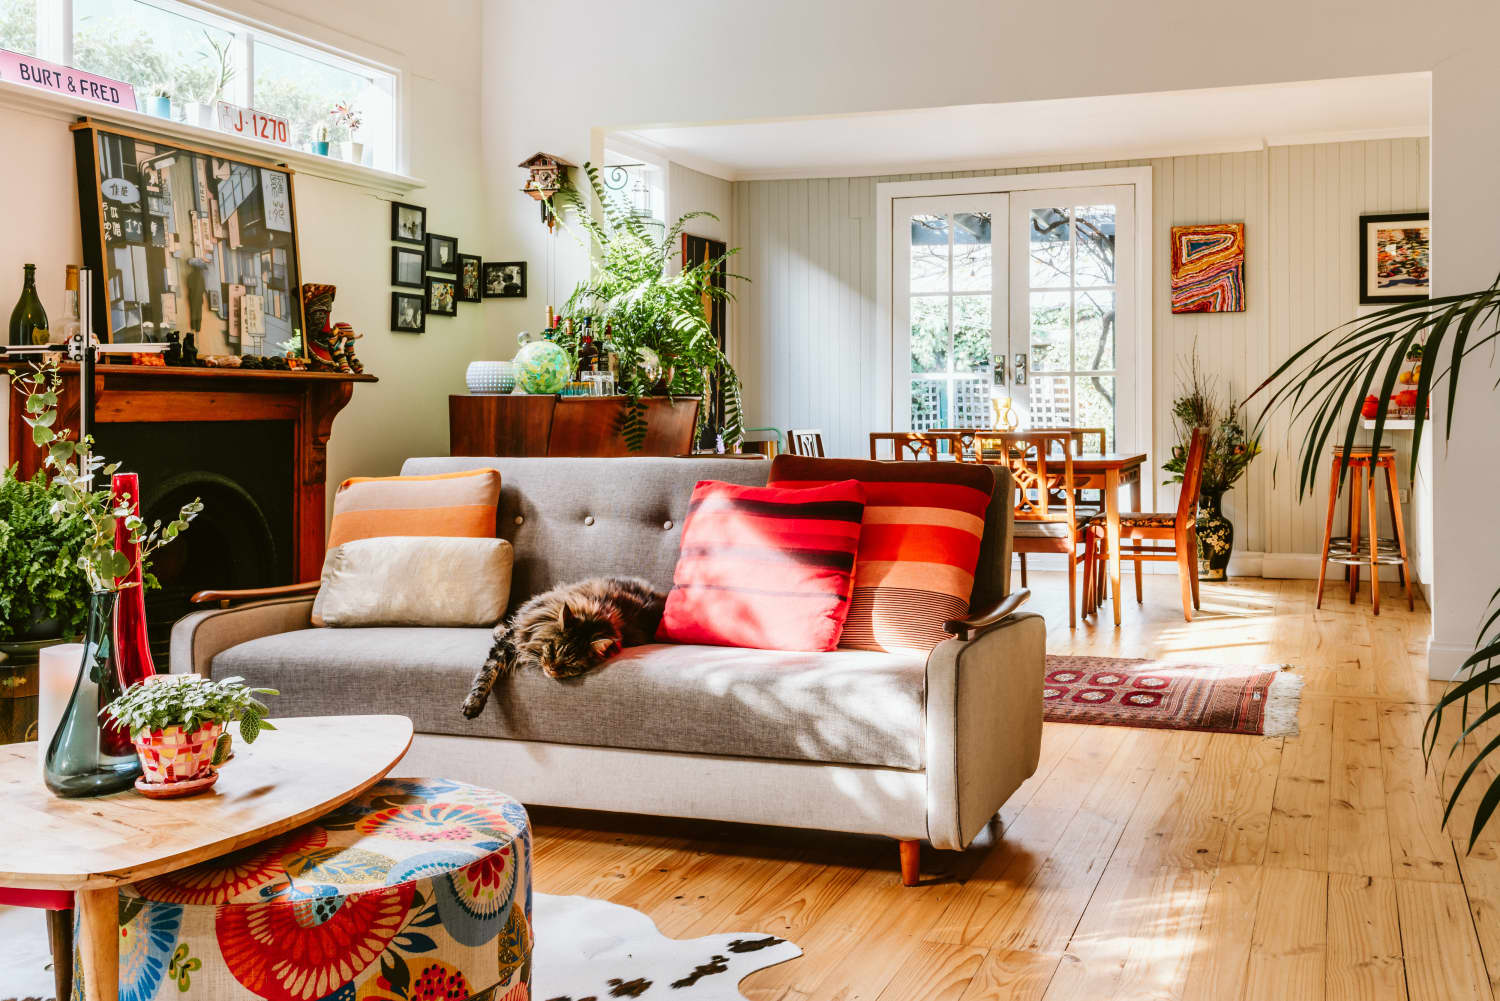 A 1920s Australian House Is Full of Secondhand Finds, Fabulous Art, and Cute Pets